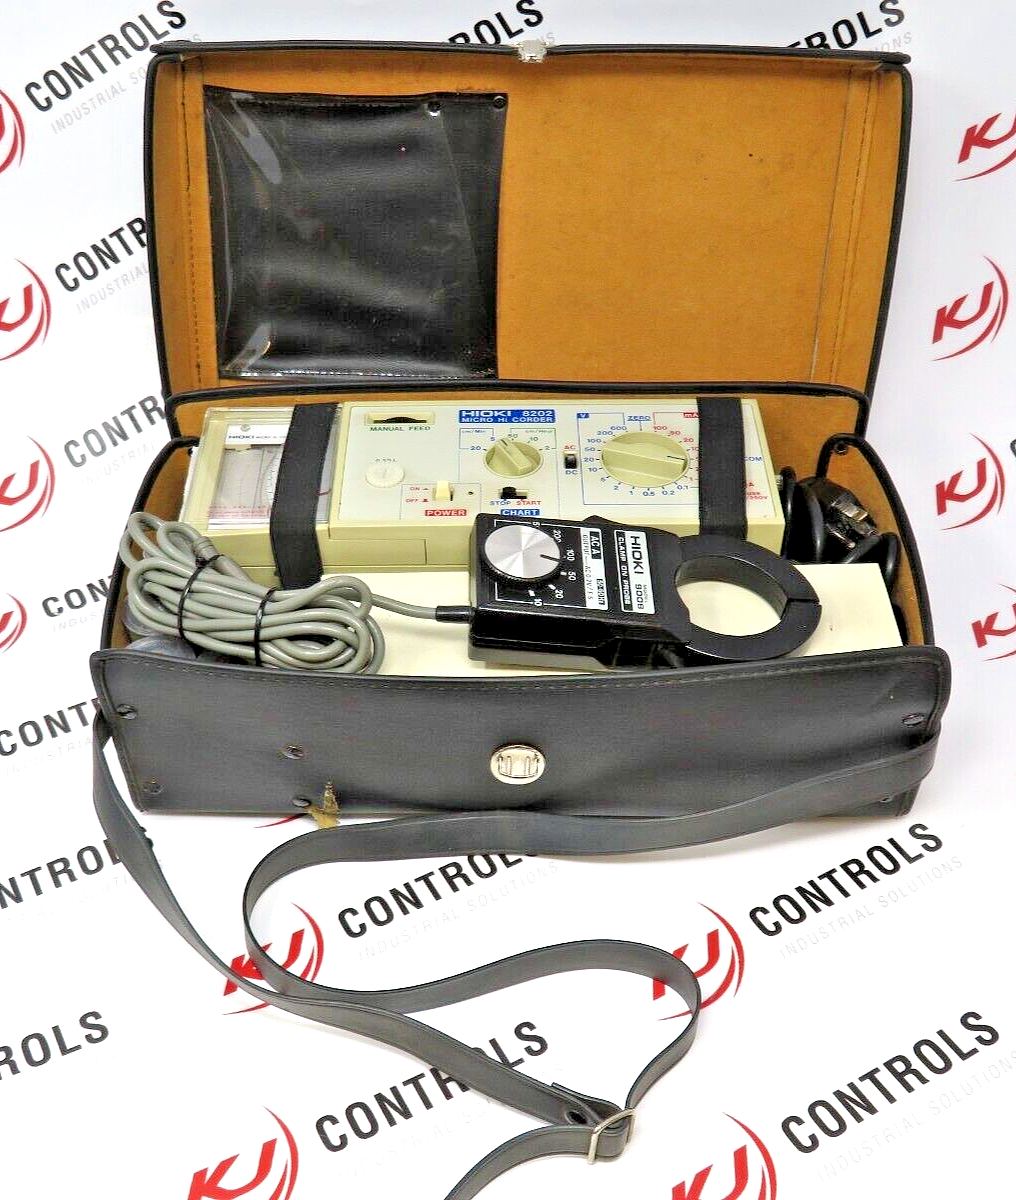 Hioki Micro Hi Corder 8202 With Clamp Probe 9008 110-120 VAC With Carry Case